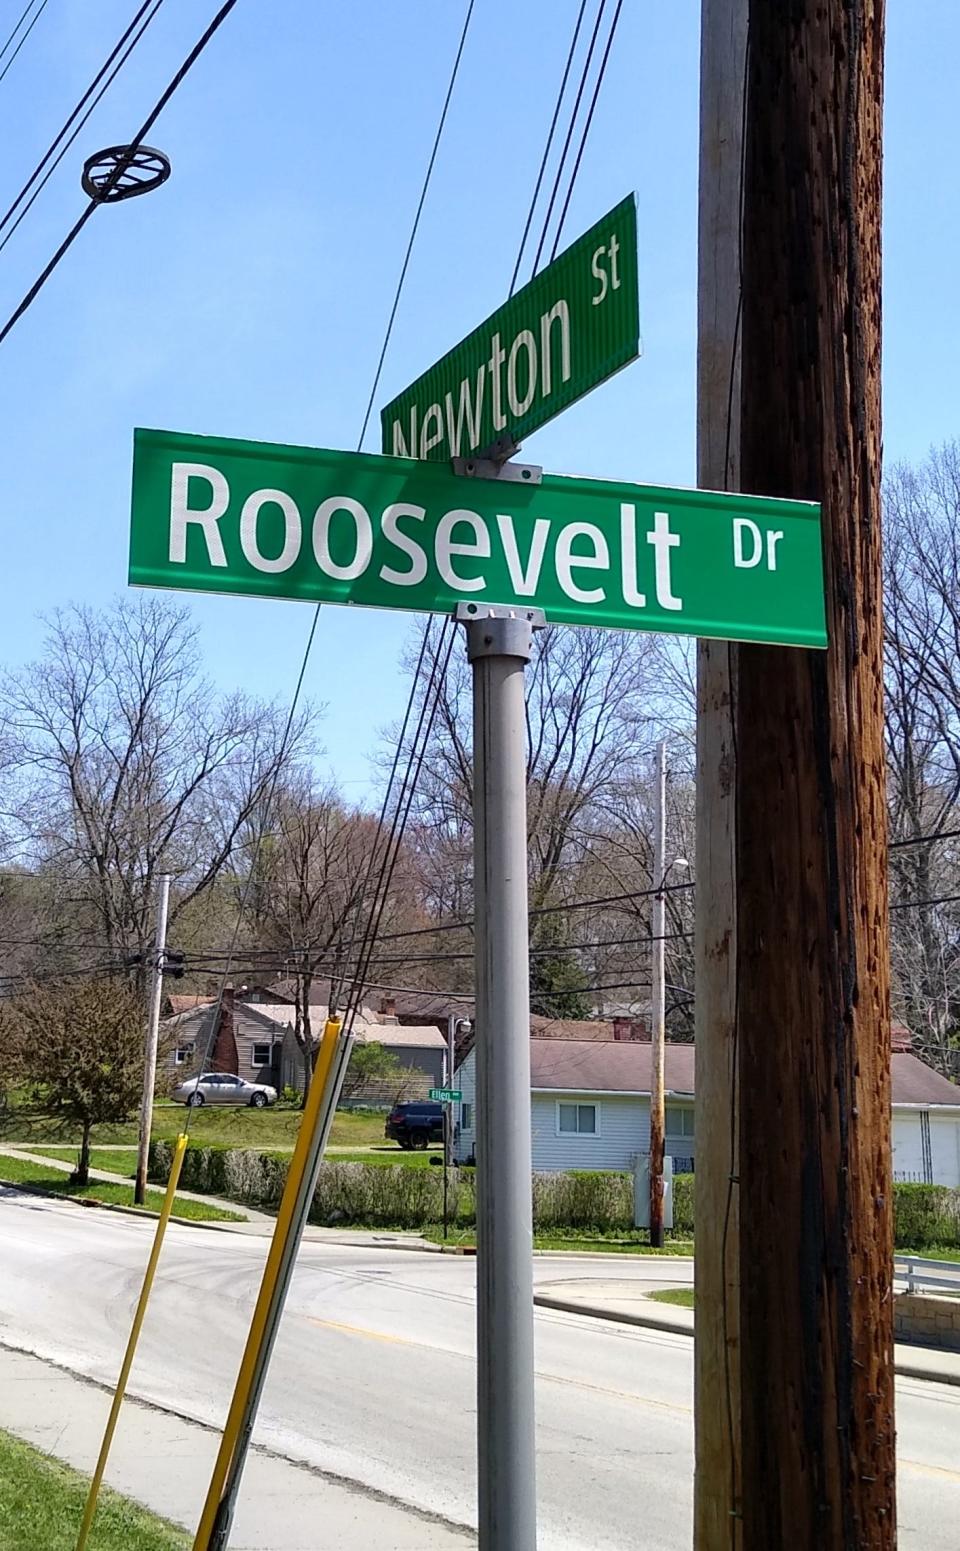 Roosevelt Drive in Goodyear Heights is named for President Theodore Roosevelt.